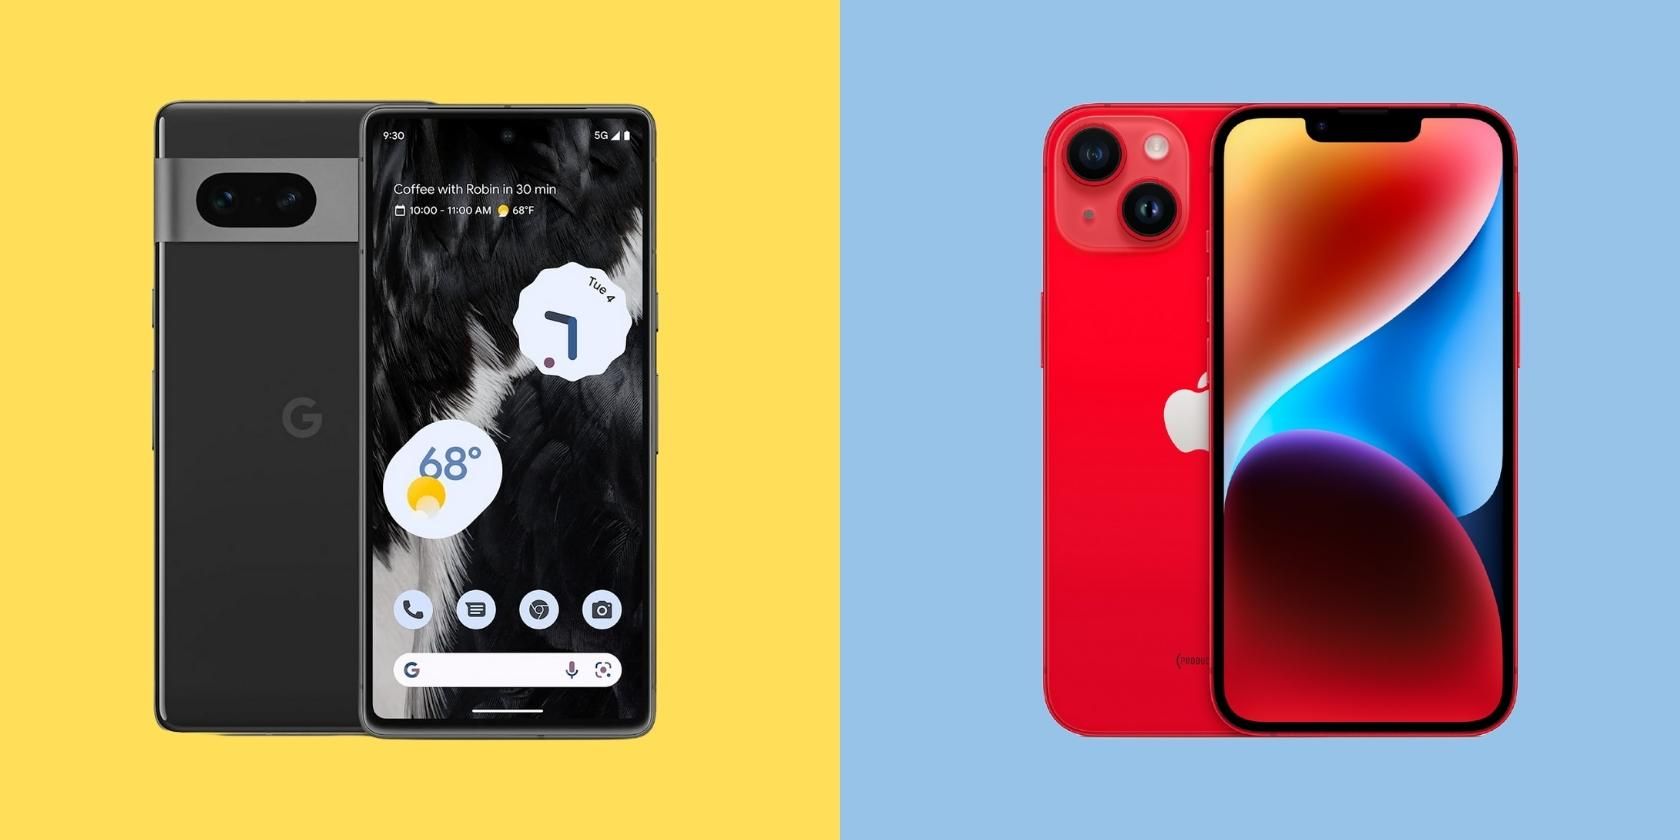 Google Pixel 7 and Apple iPhone 14 devices side-by-side